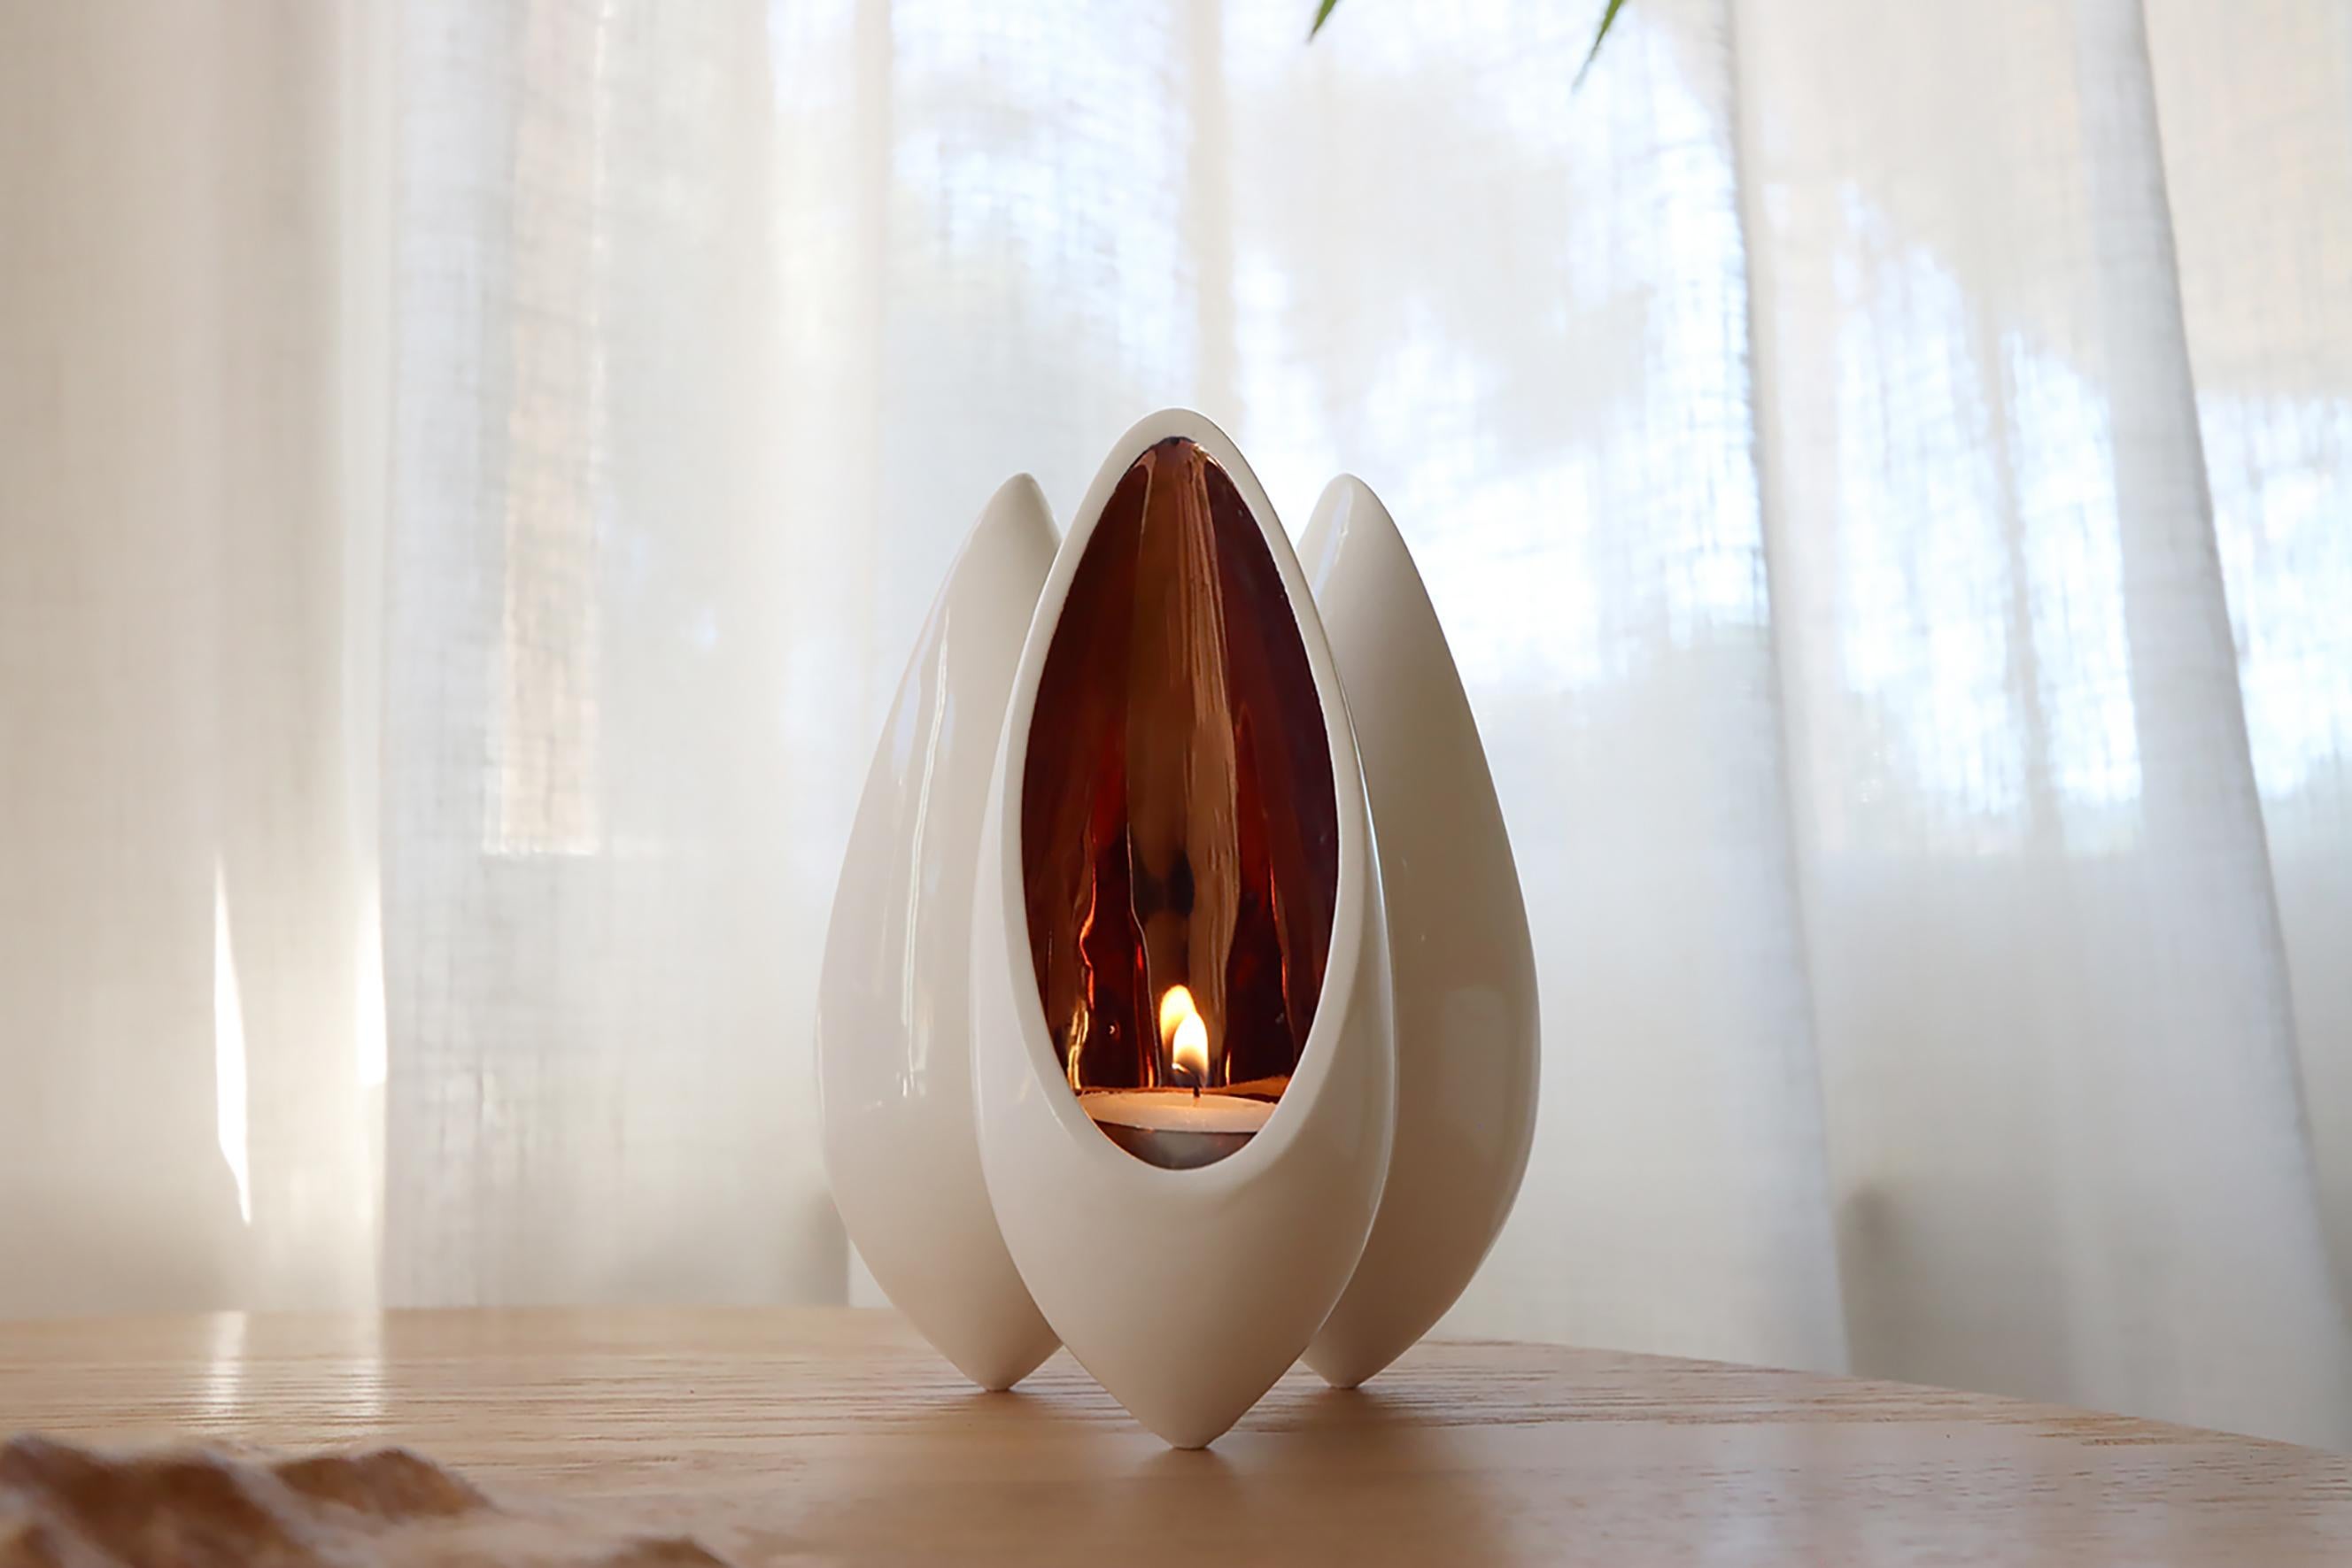 Introducing our stunning 3-part Seed Pod Tealight Holder. Each pod is hand-cast, kiln-fired and hand-painted by skilled artisans in New Zealand.

The elegant seed pod design adds not just visual appeal but also a stable form, allowing for a soft